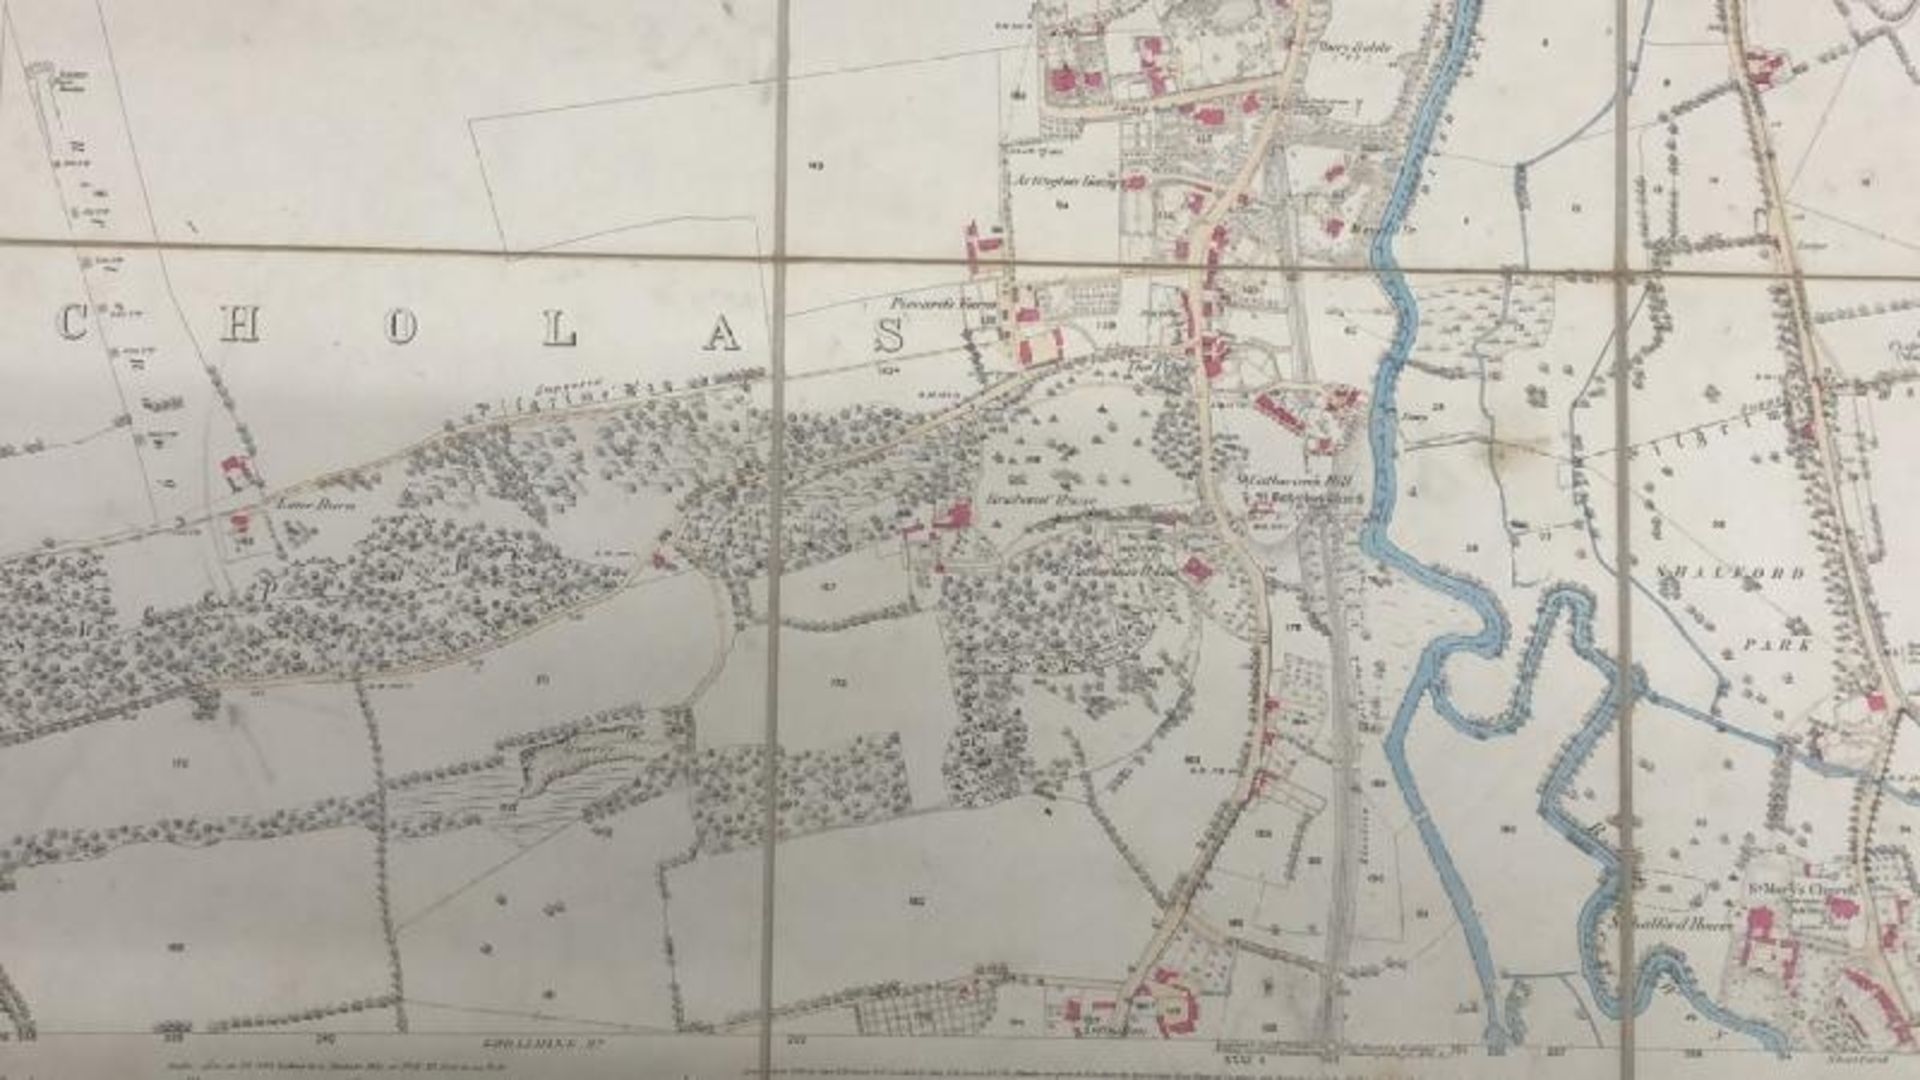 A large 25 inches to 1 mile scale map of Guildford, surveyed in 1827, 202.5cm x 134.5cm opened, - Image 12 of 16